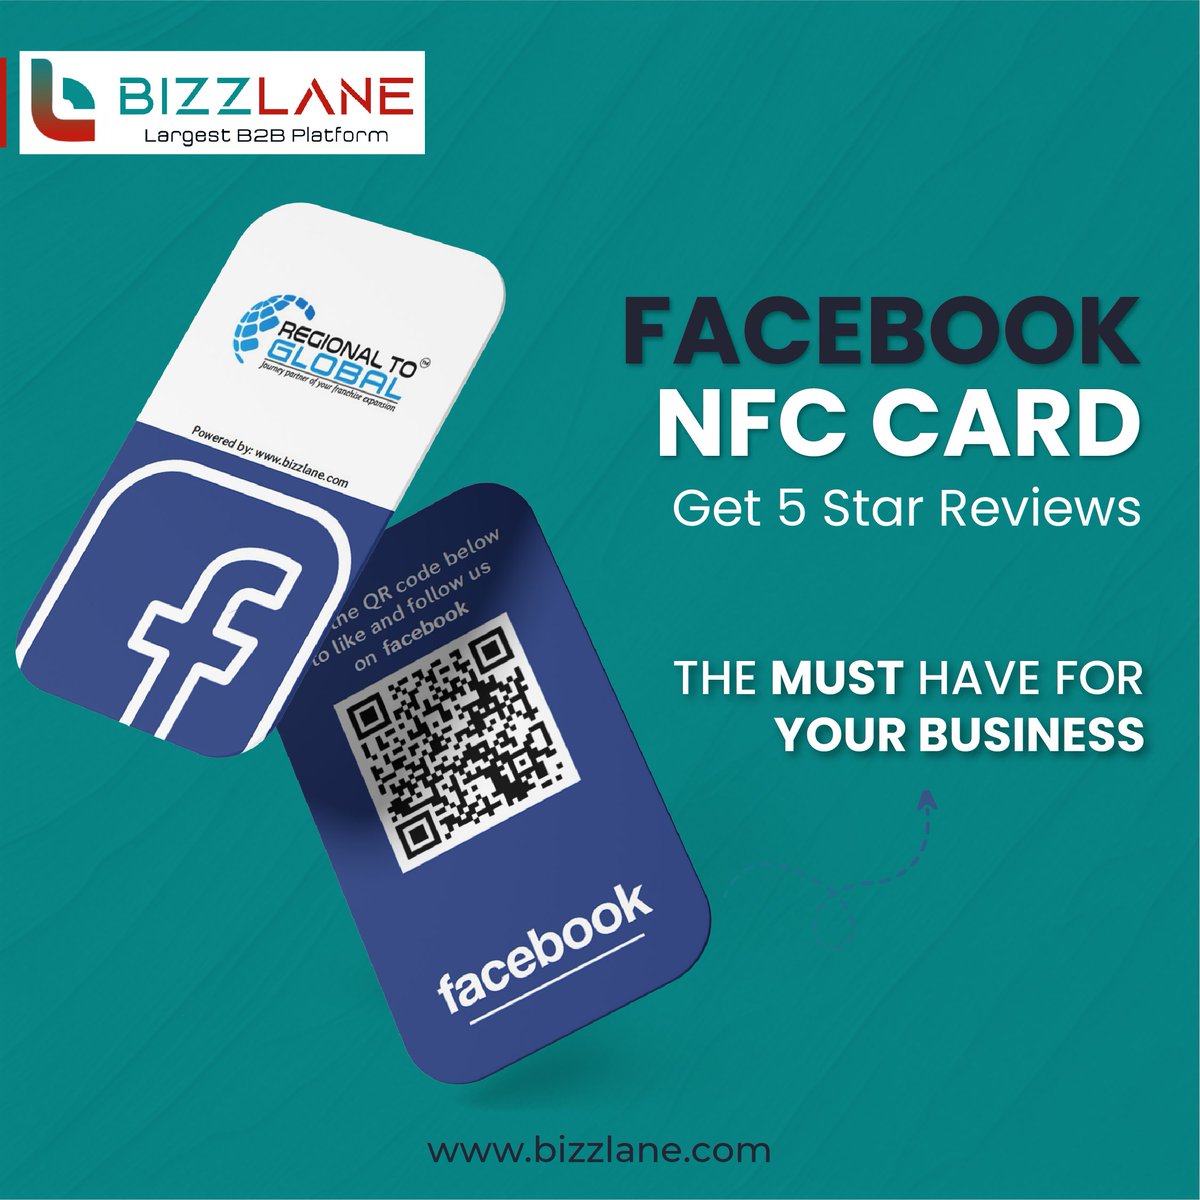 FACEBOOK NFC CARD
Get 5 Star Reviews

THE MUST HAVE FOR YOUR BUSINESS

#bizzlane #NFCcards #bizzlanecard #nfcbusinesscard #foryourbusiness #smartbusinesscards #SmartNetwork #regionaltoglobal #GrowYourBusiness #reviews #5starreview #getreview #FacebookReview #facebookcards